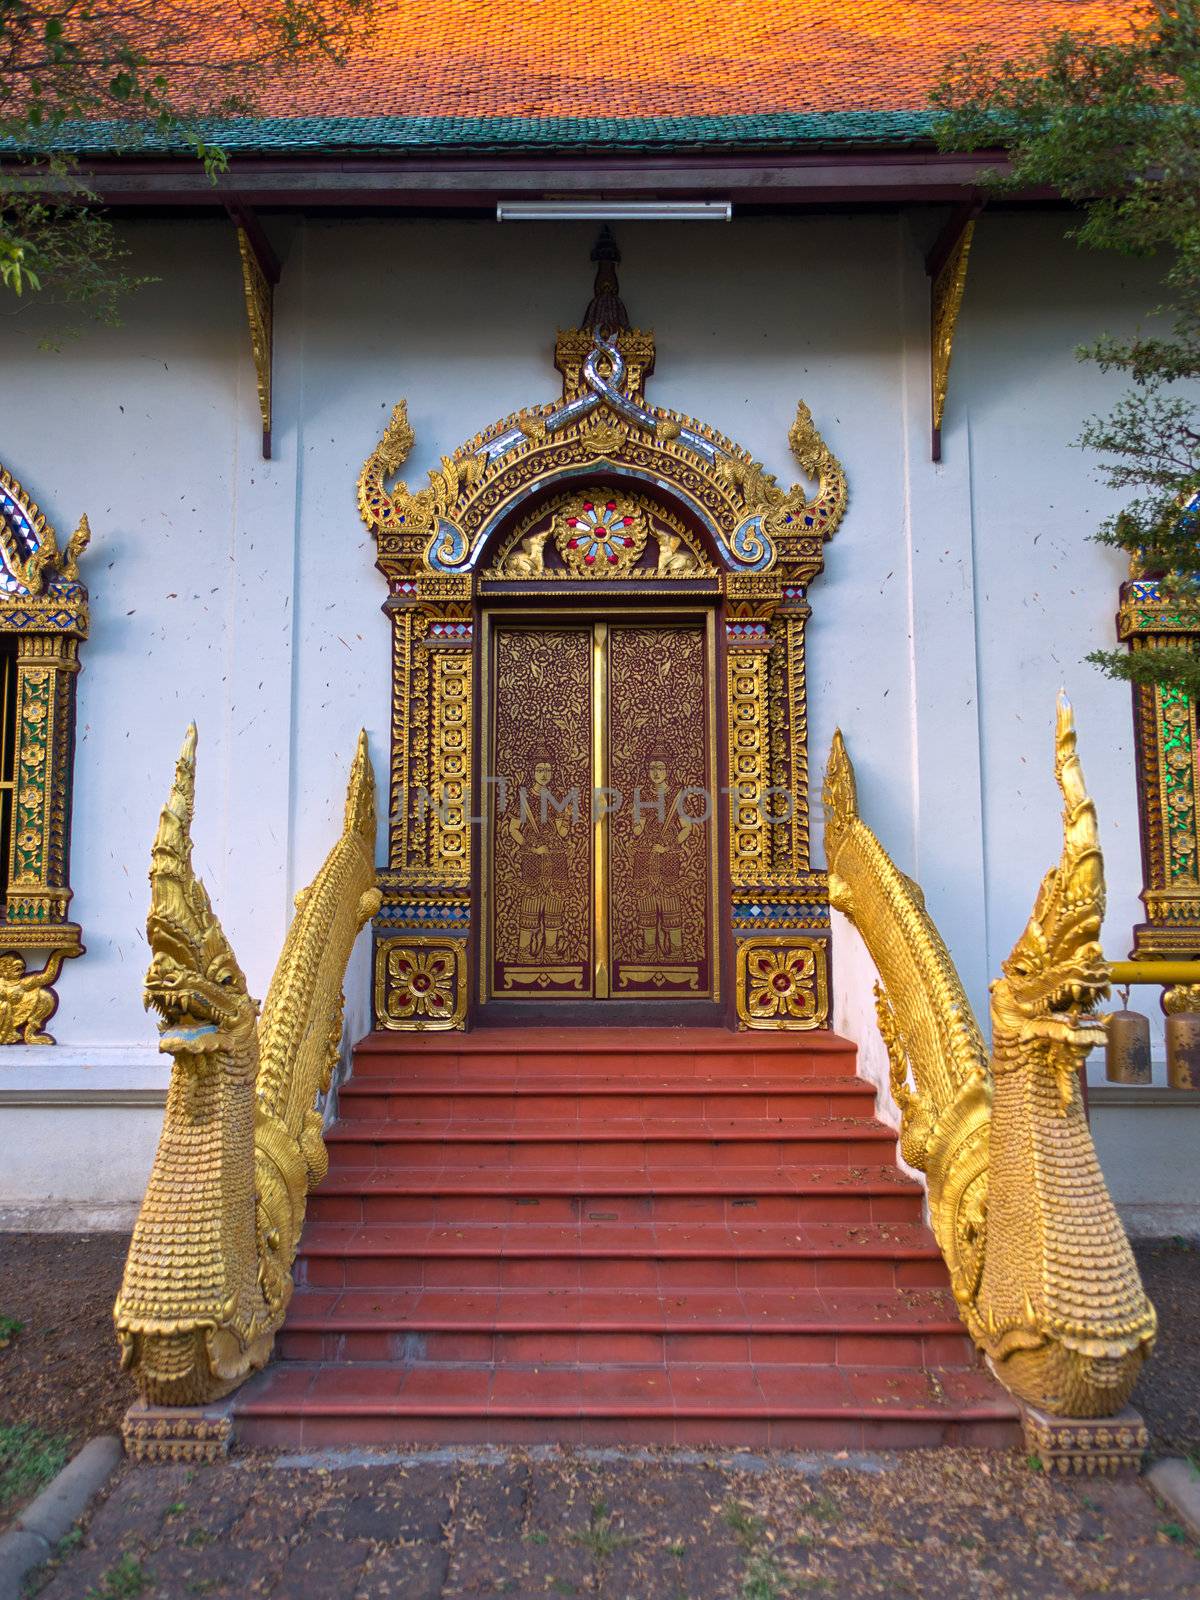 Golden dragons in front of carved doors of asian temple, Wat Chiang Man, Chiang Mai, Northern Thailand